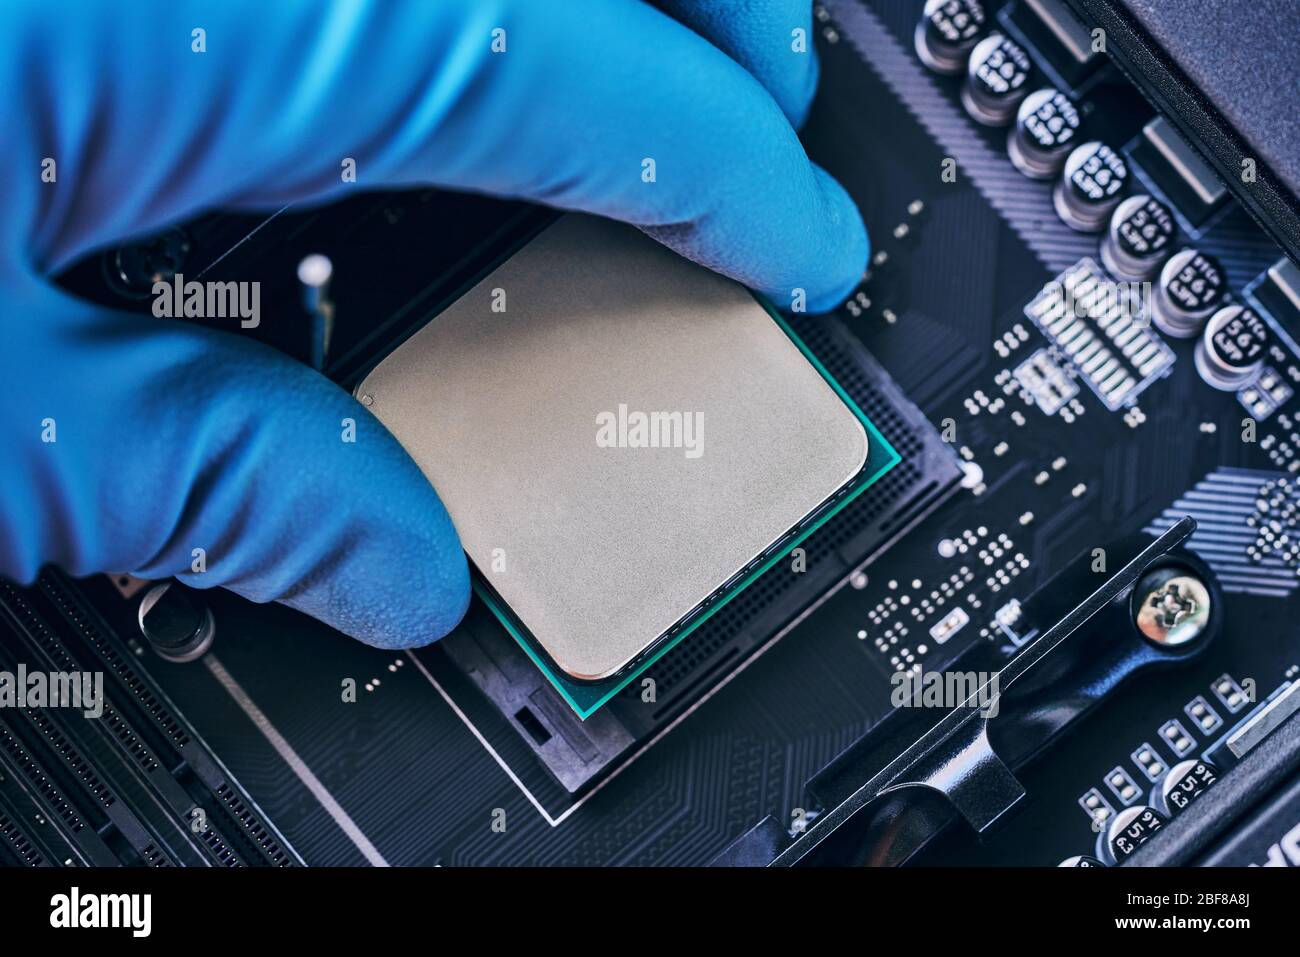 Electronic engineer of computer technology. Installing the processor on the motherboard. Pc repair, technician and industry support concept. Stock Photo